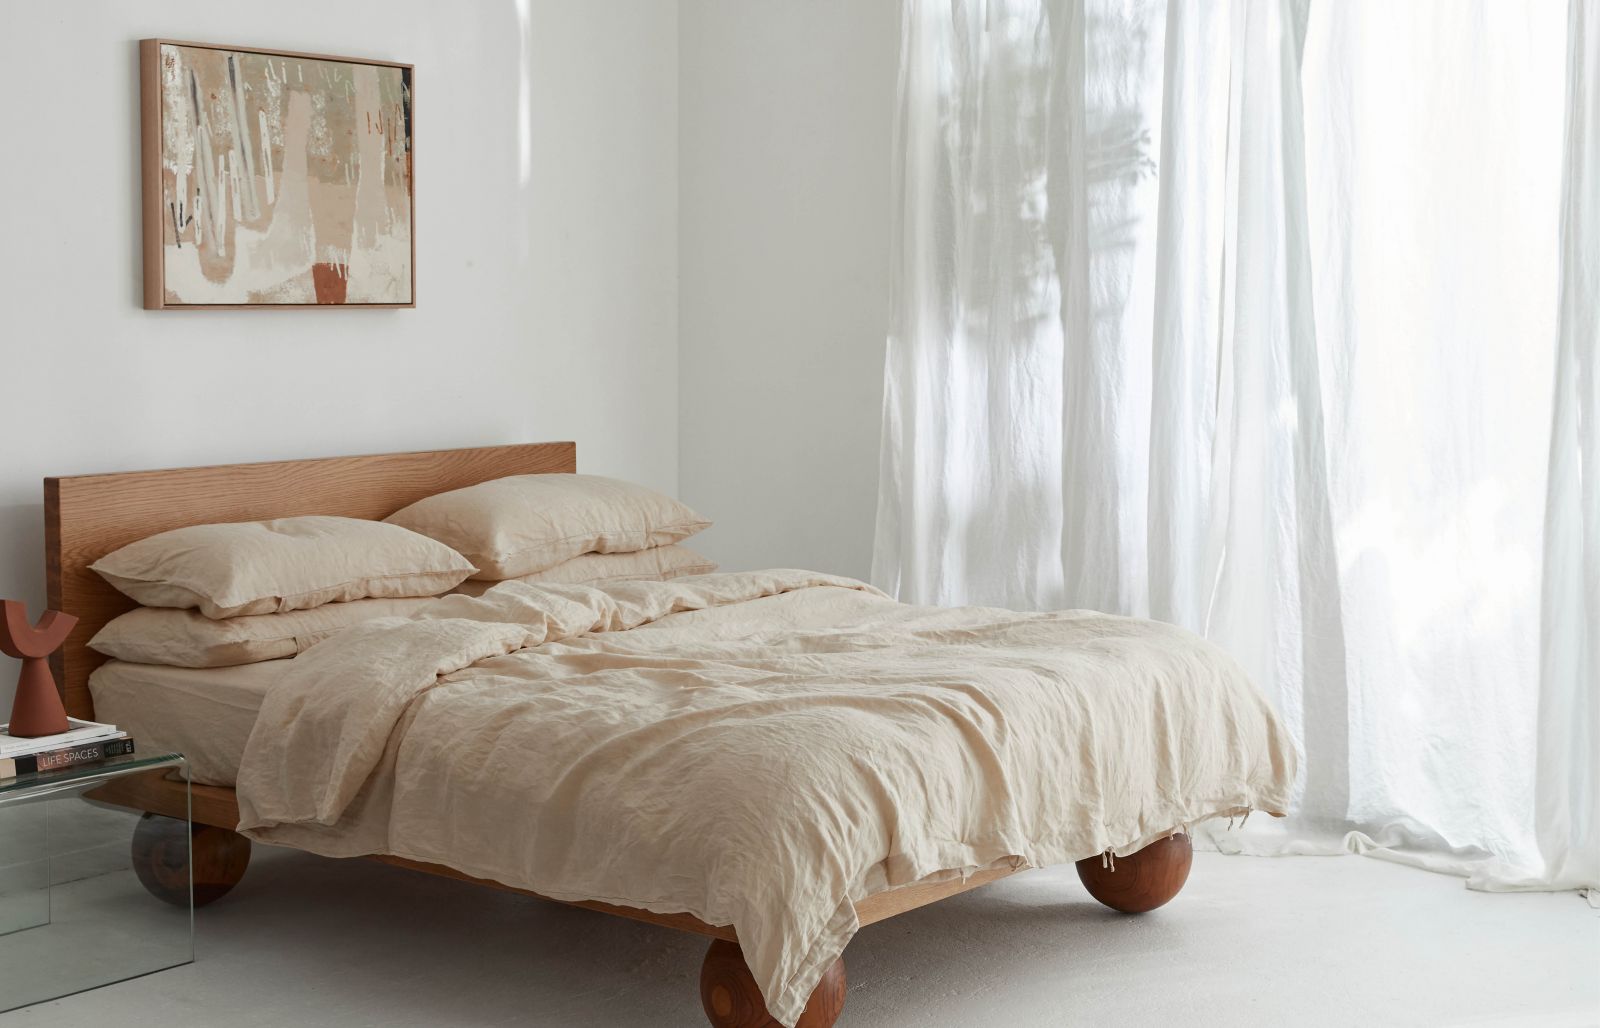 French linen, lookbook, creme, bedding